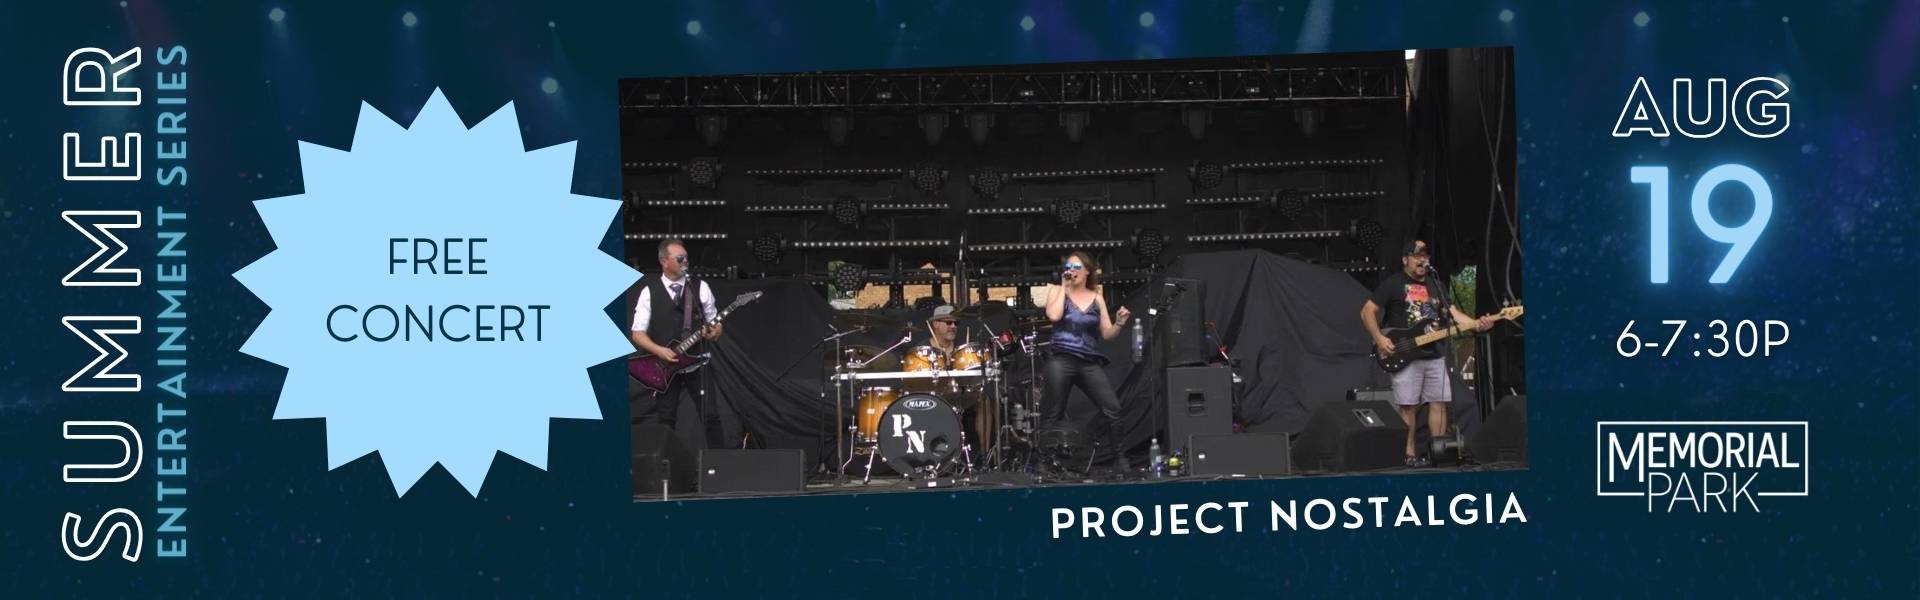 Free concert at Memorial Park featuring Project Nostalgia